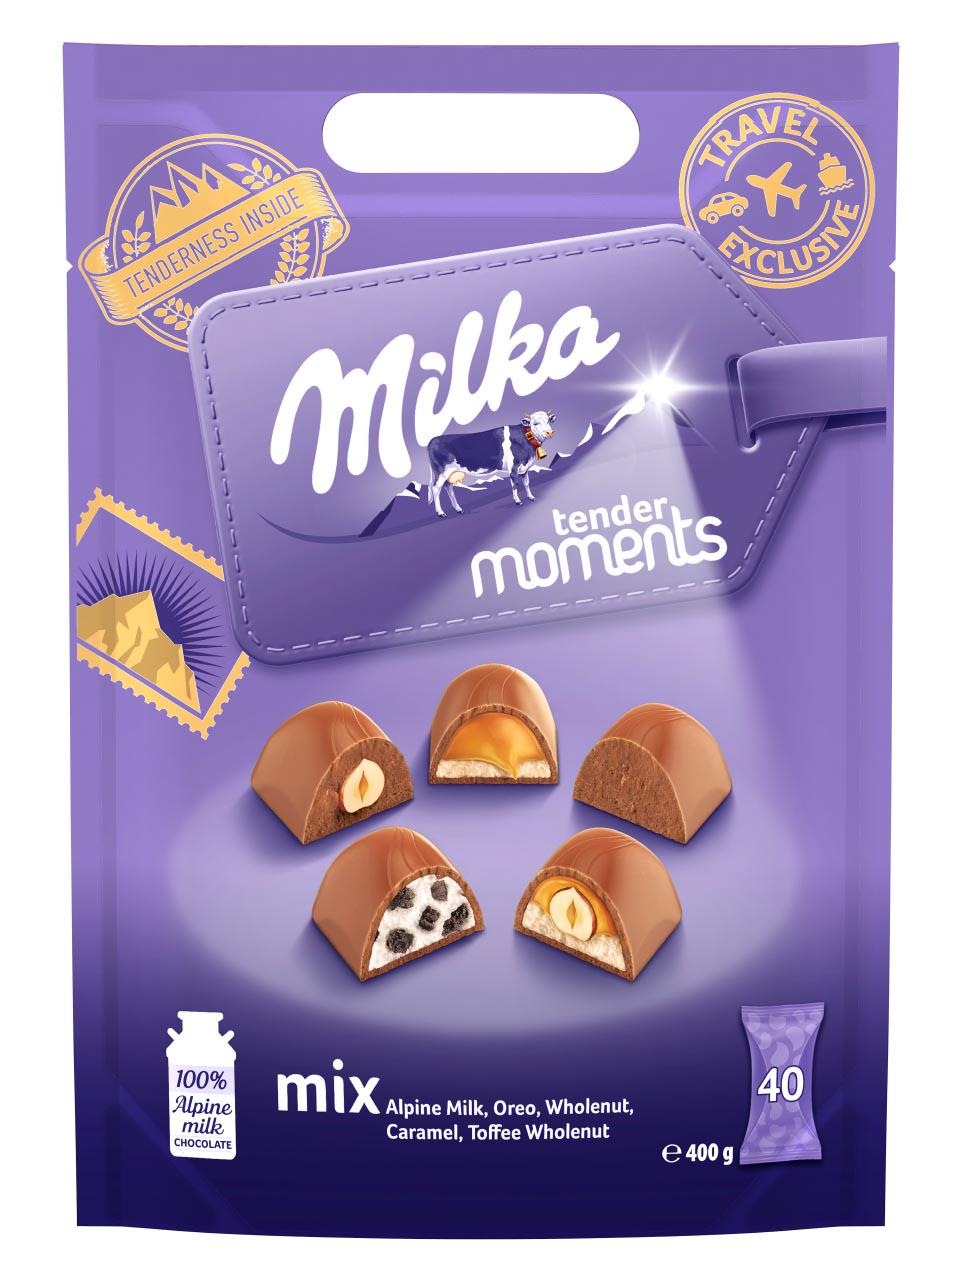 Online | Airport Assorted Milka Moments 400g Pouch Frankfurt Shopping